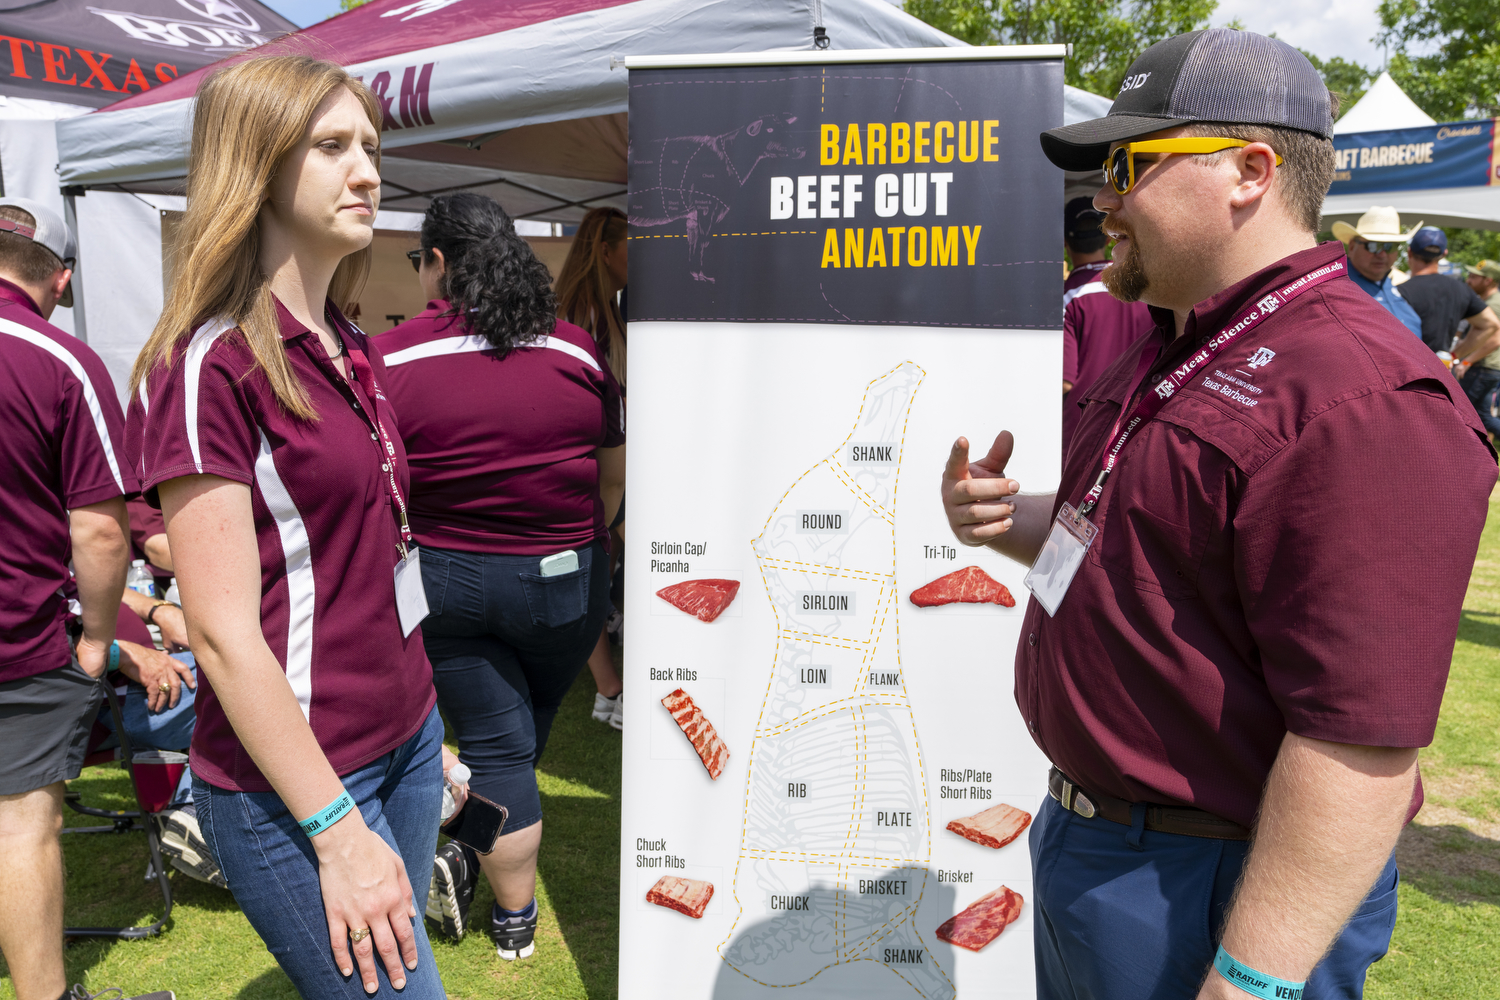 Two Texas A&M students stand in front of a banner displaying Barbecue Beef Cut Anatomy